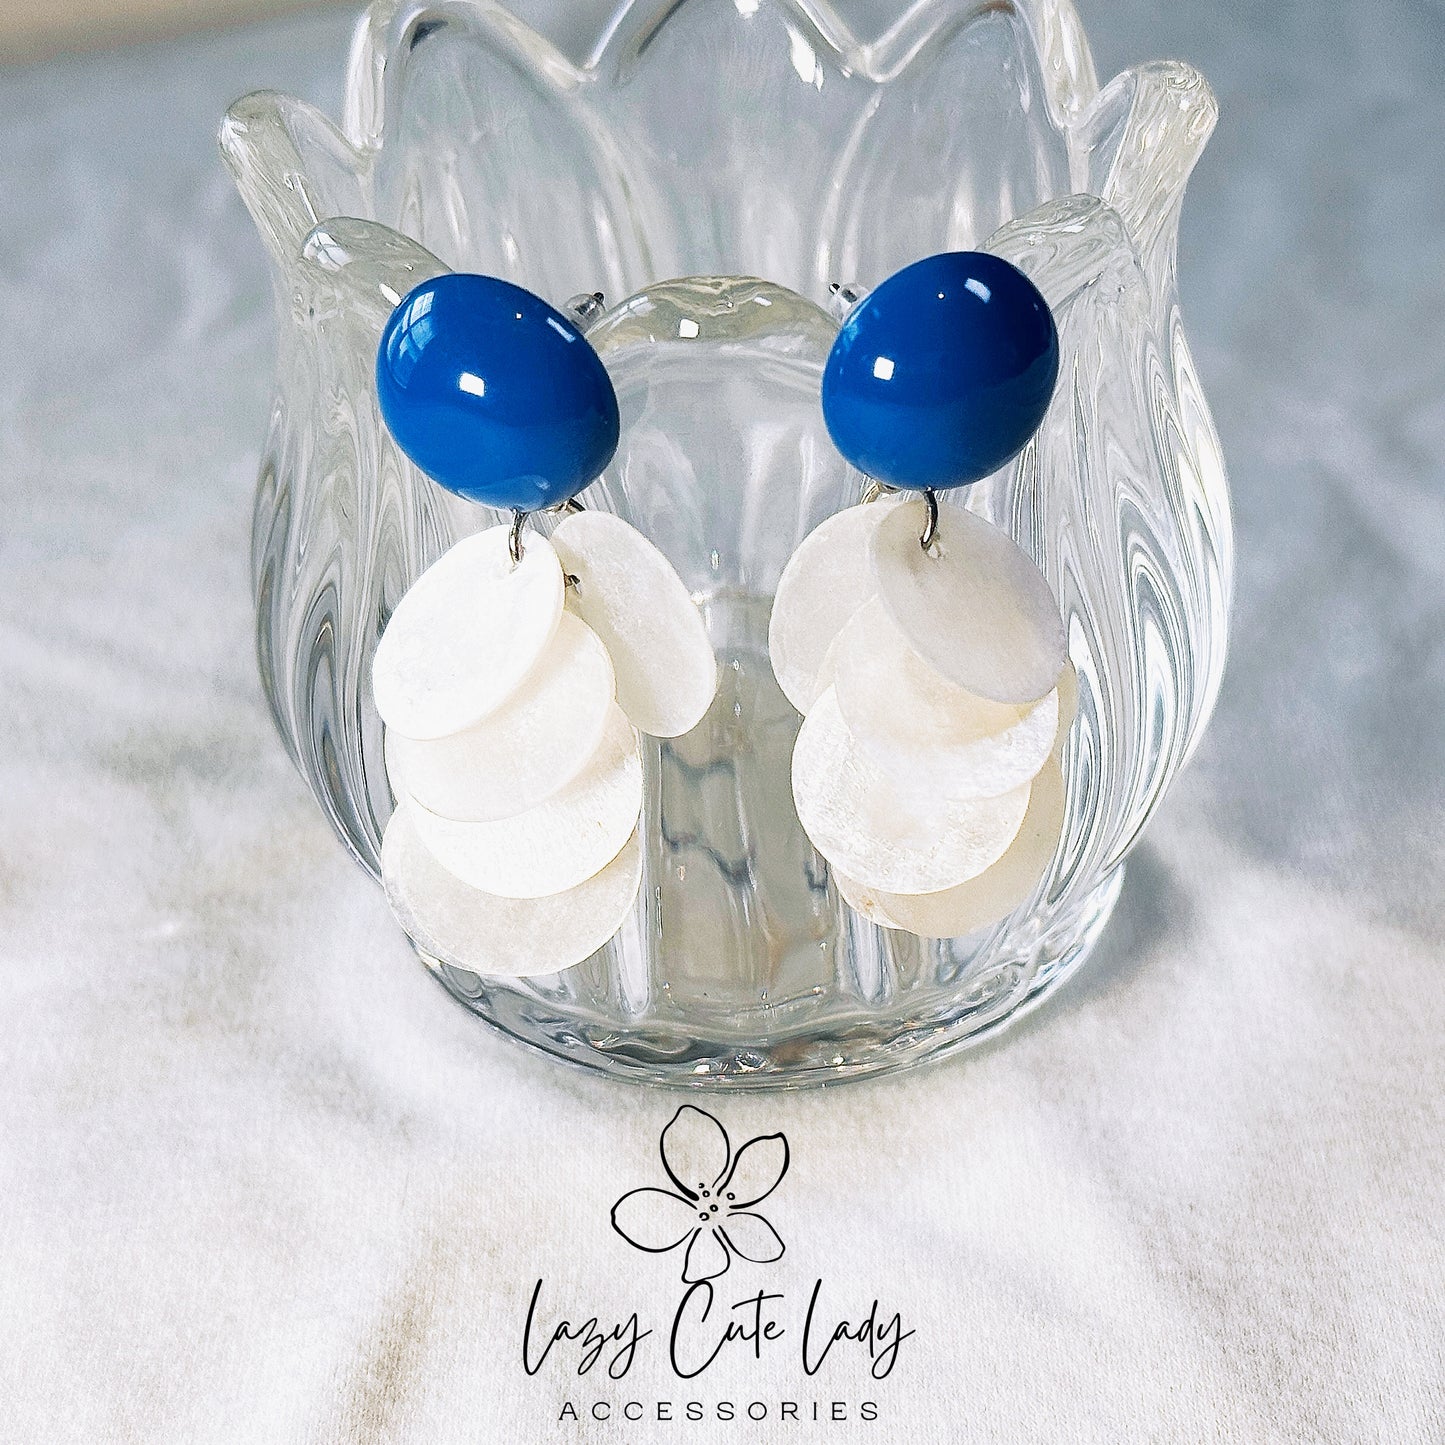 Exquisite White Seashell and Deep Blue Round Earrings